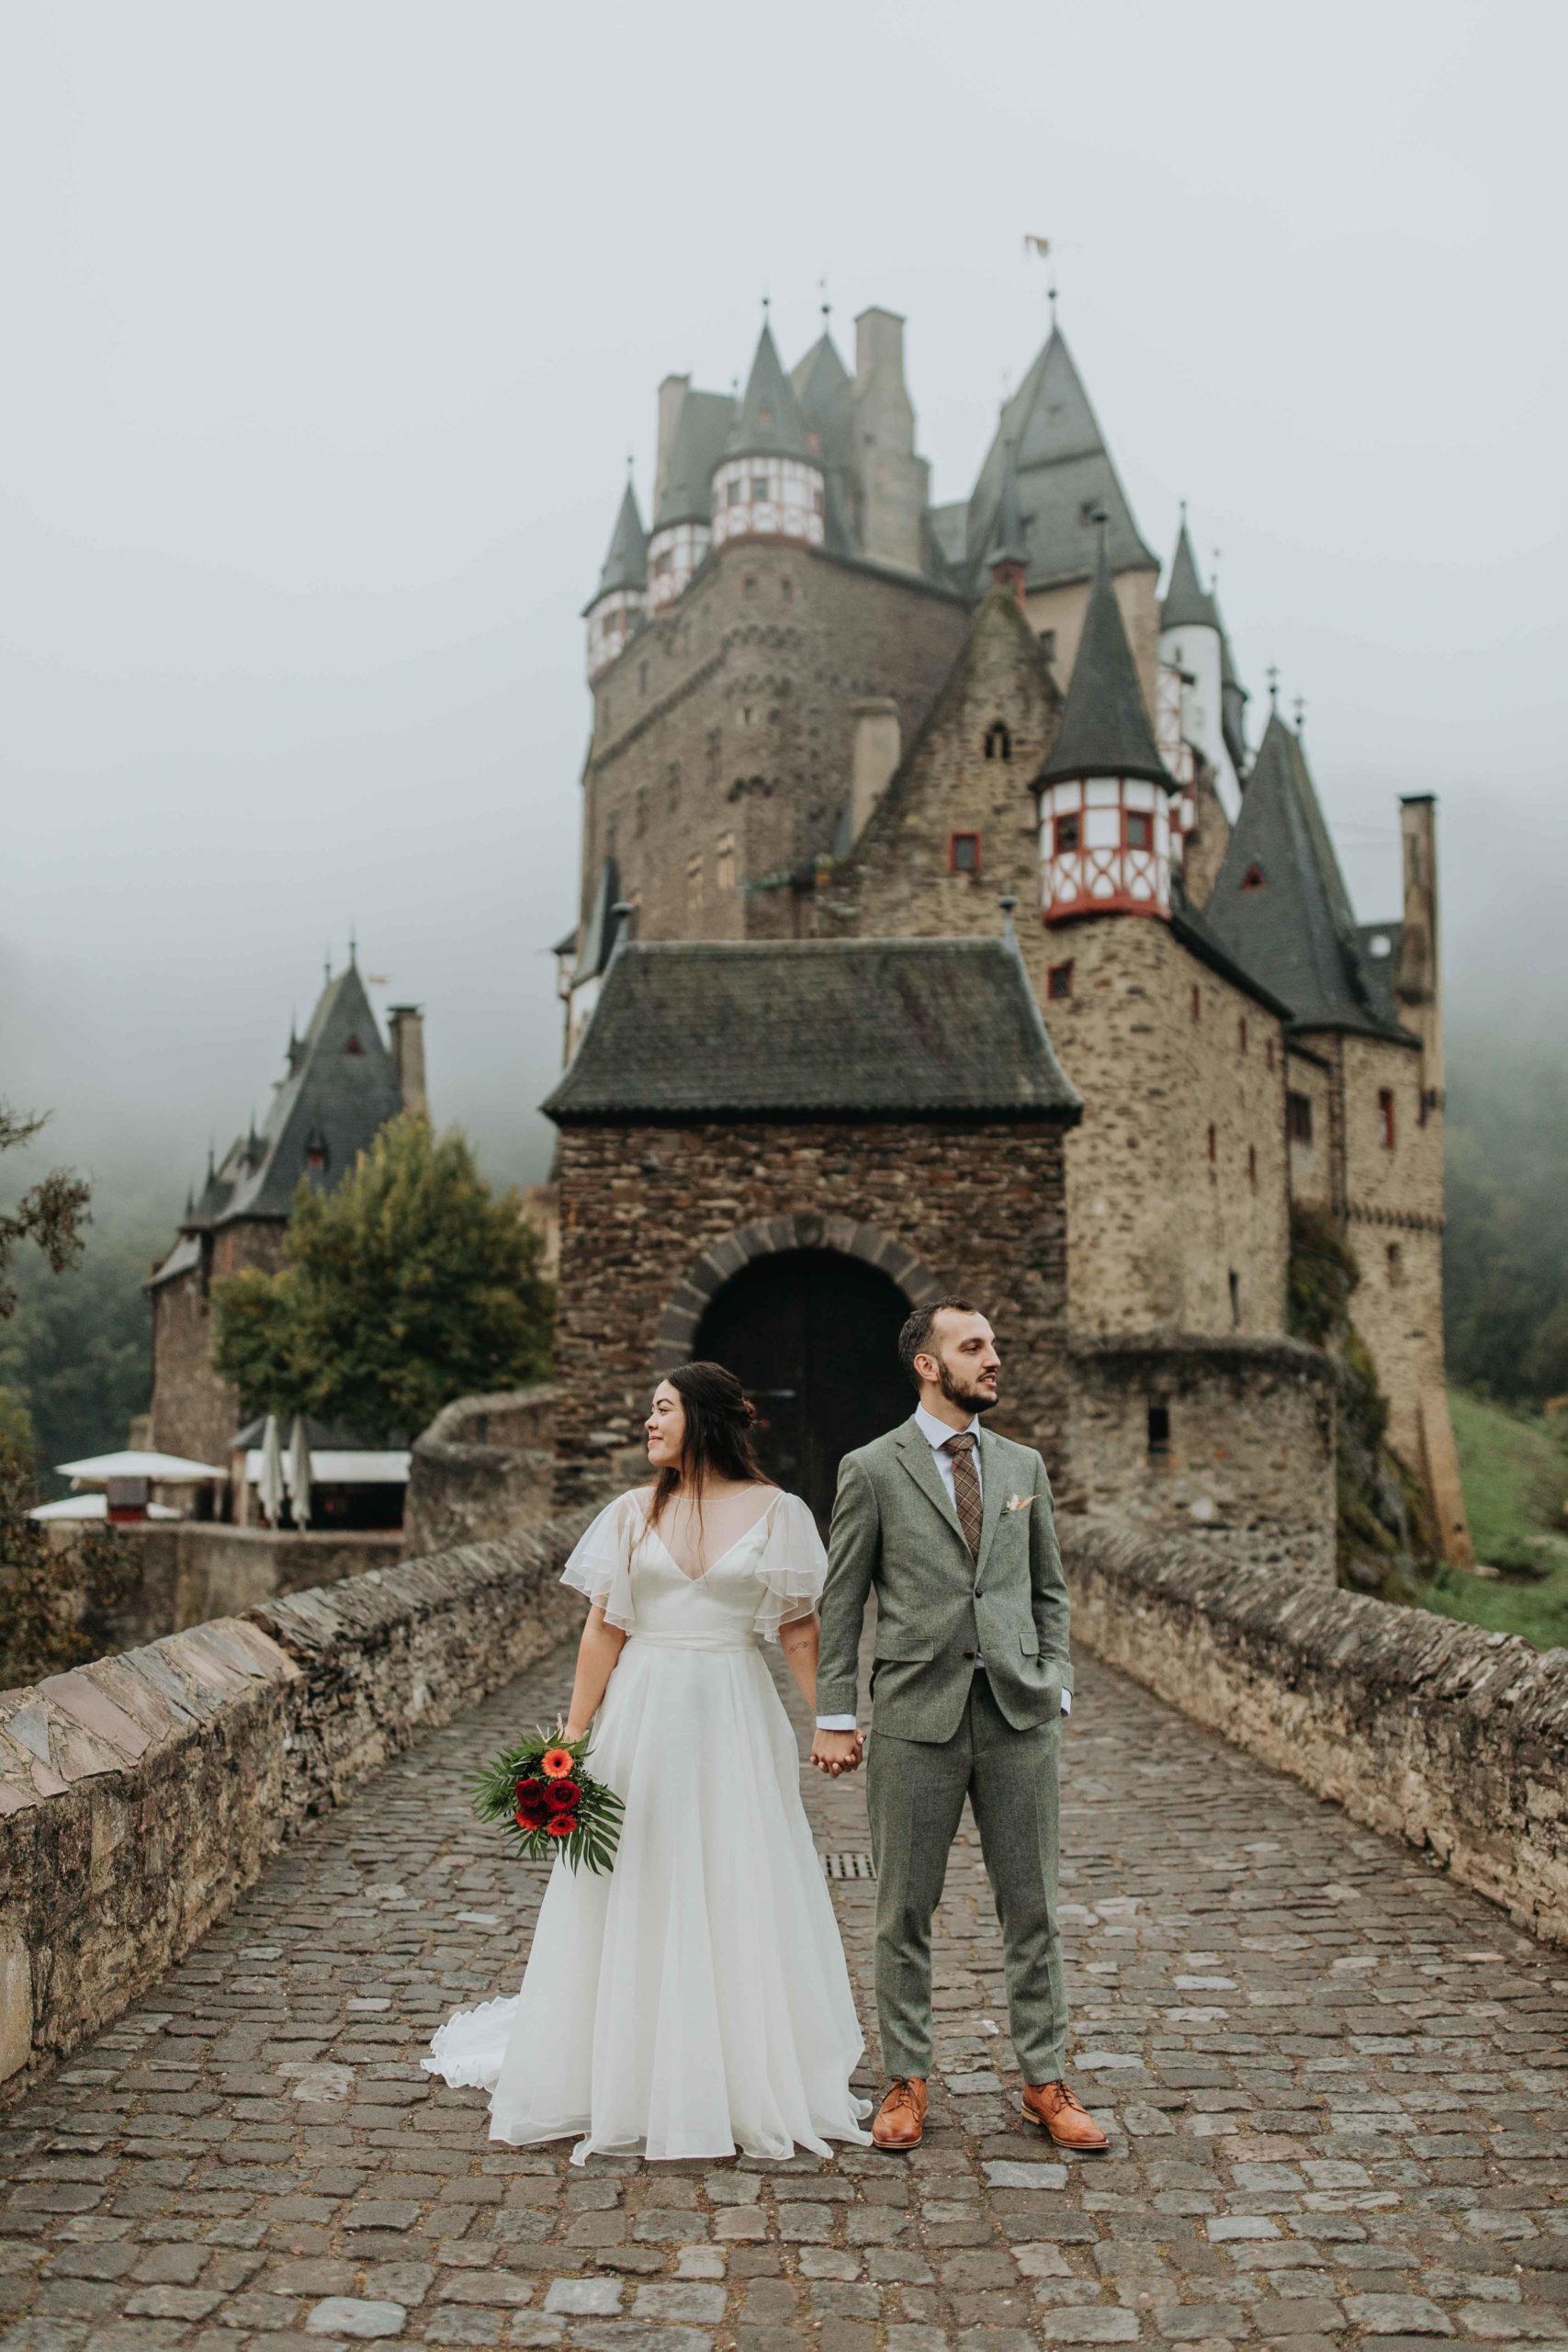 Burg Eltz is Germany's most beautiful castle for wedding photos